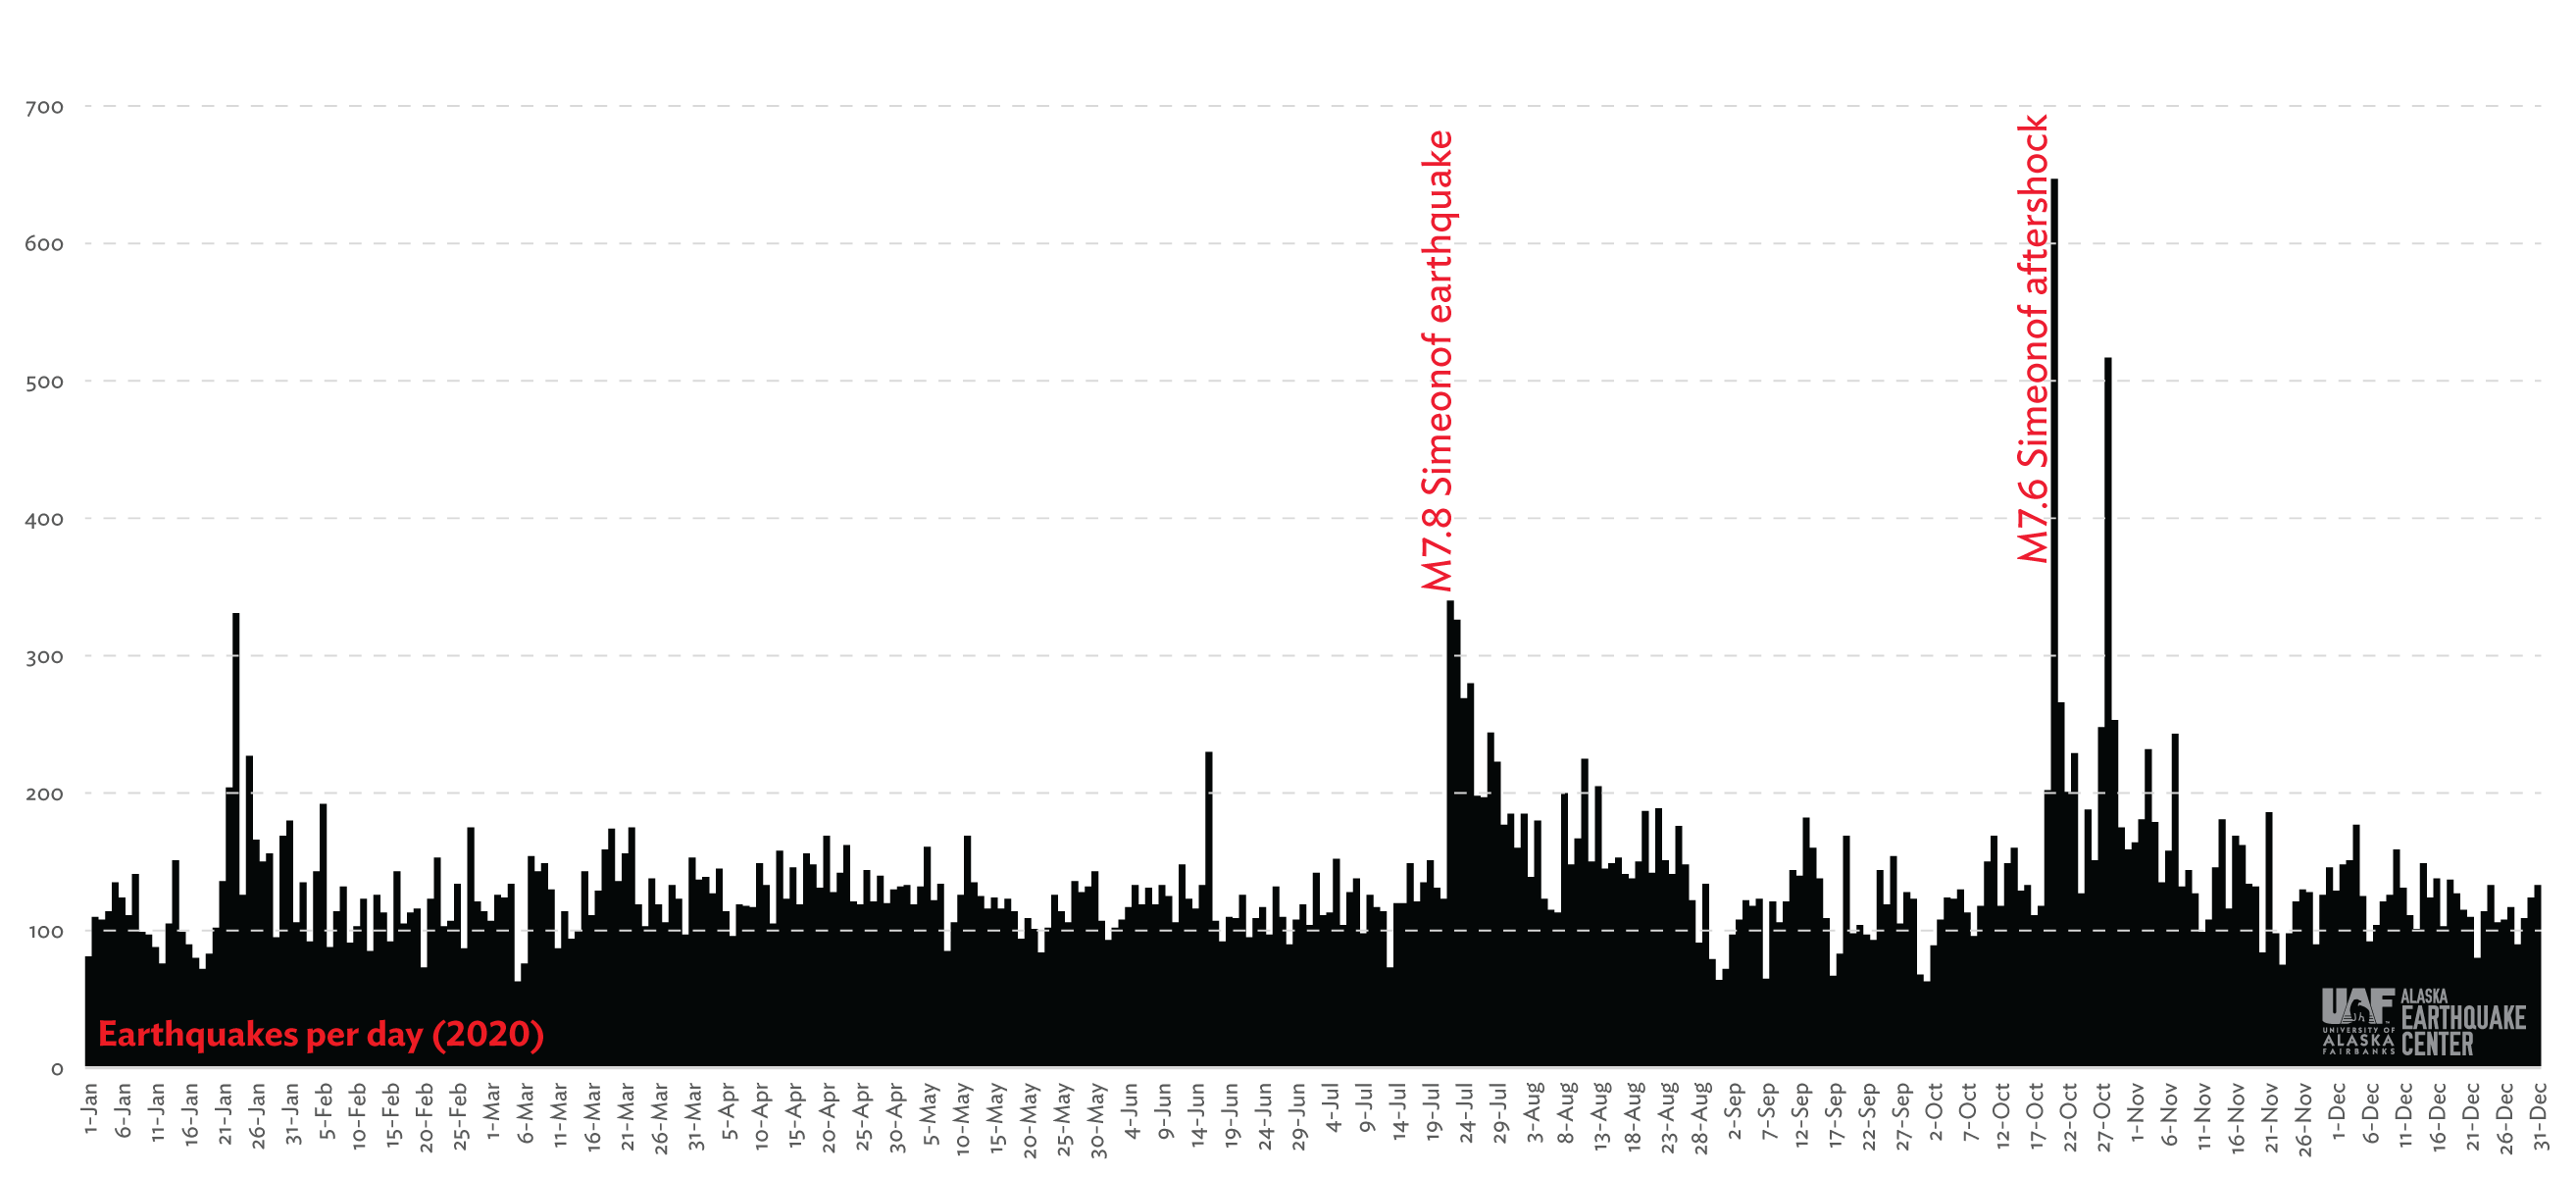 Plot of number of earthquakes per day. 